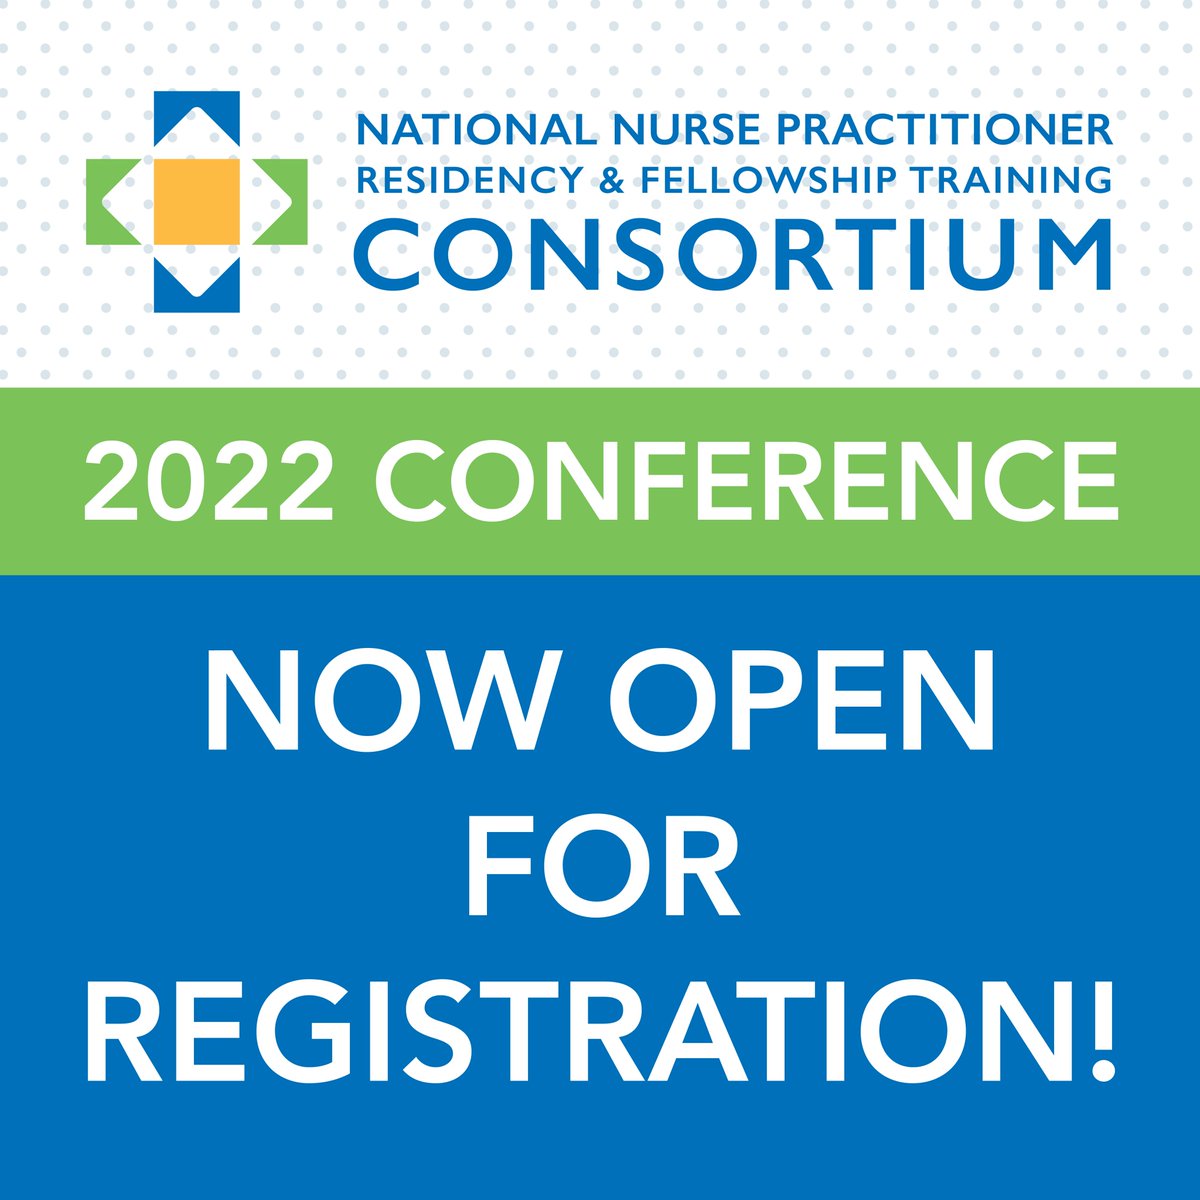 Join us 07/24/22 - 07/25/22 for the Consortium's 2022 Annual Conference in Washington, D.C. Sessions will focus on critical elements of curriculum, innovations, evaluation, faculty development, and more! bit.ly/3xsGsM6 #conference #consortium #postgraduatetraining